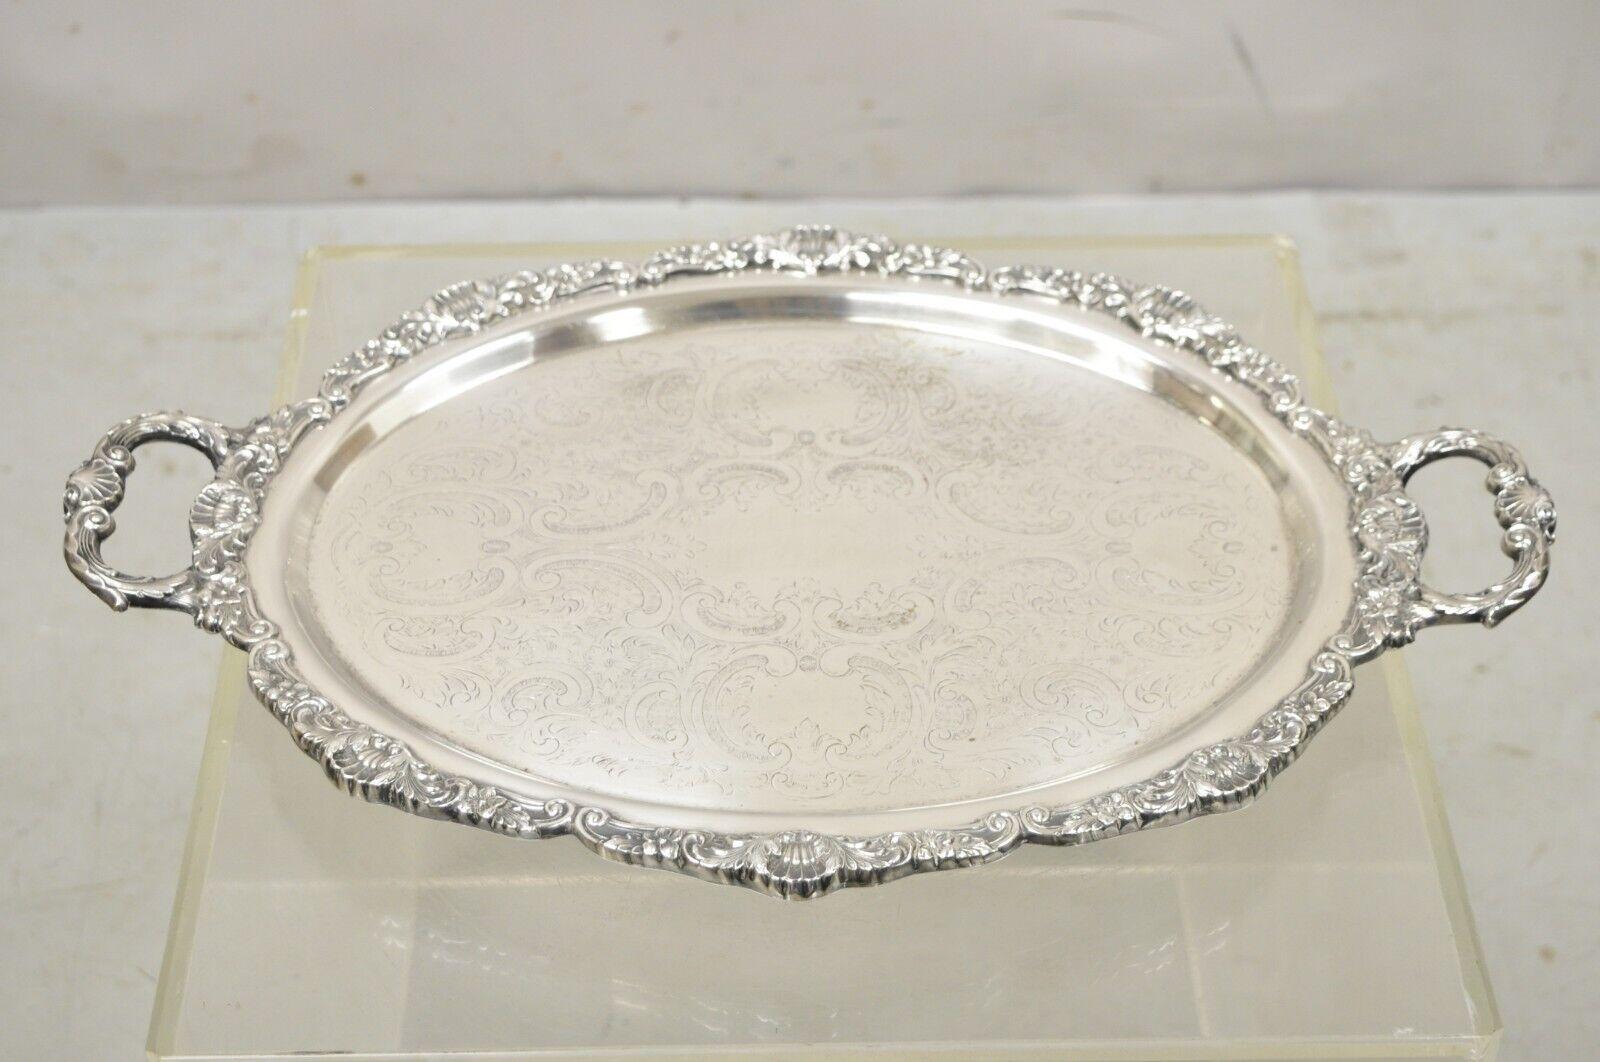 Vintage Epca Bristol Silverplate by Poole Silver Plated Oval Platter Tray 3